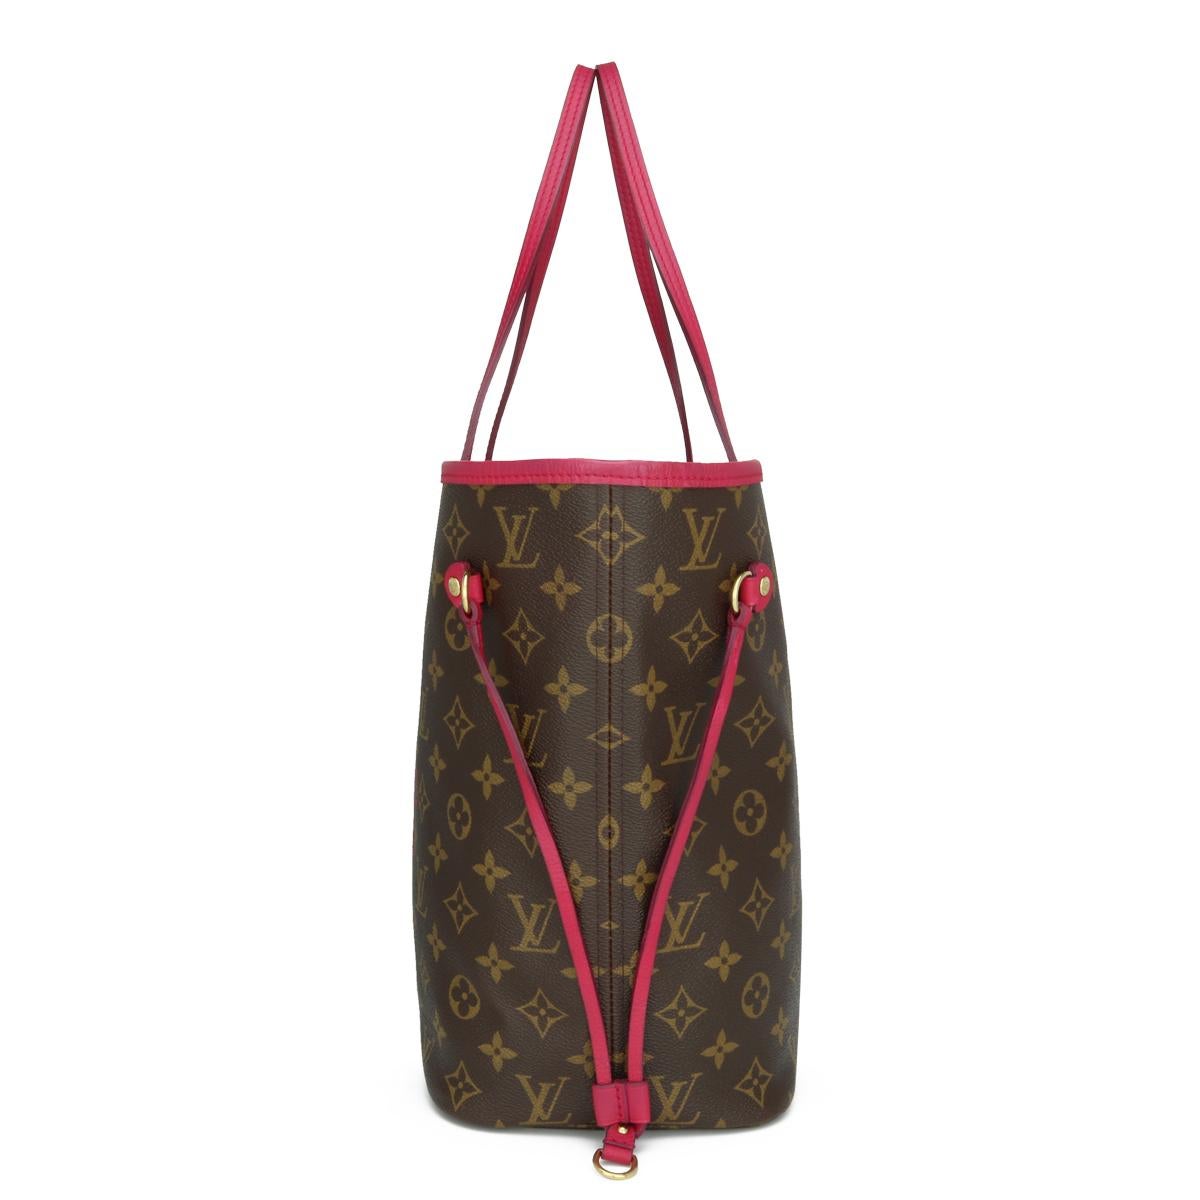 Women's or Men's Louis Vuitton Neverfull MM Ikat Bag in Monogram Fuchsia 2013 Limited Edition For Sale